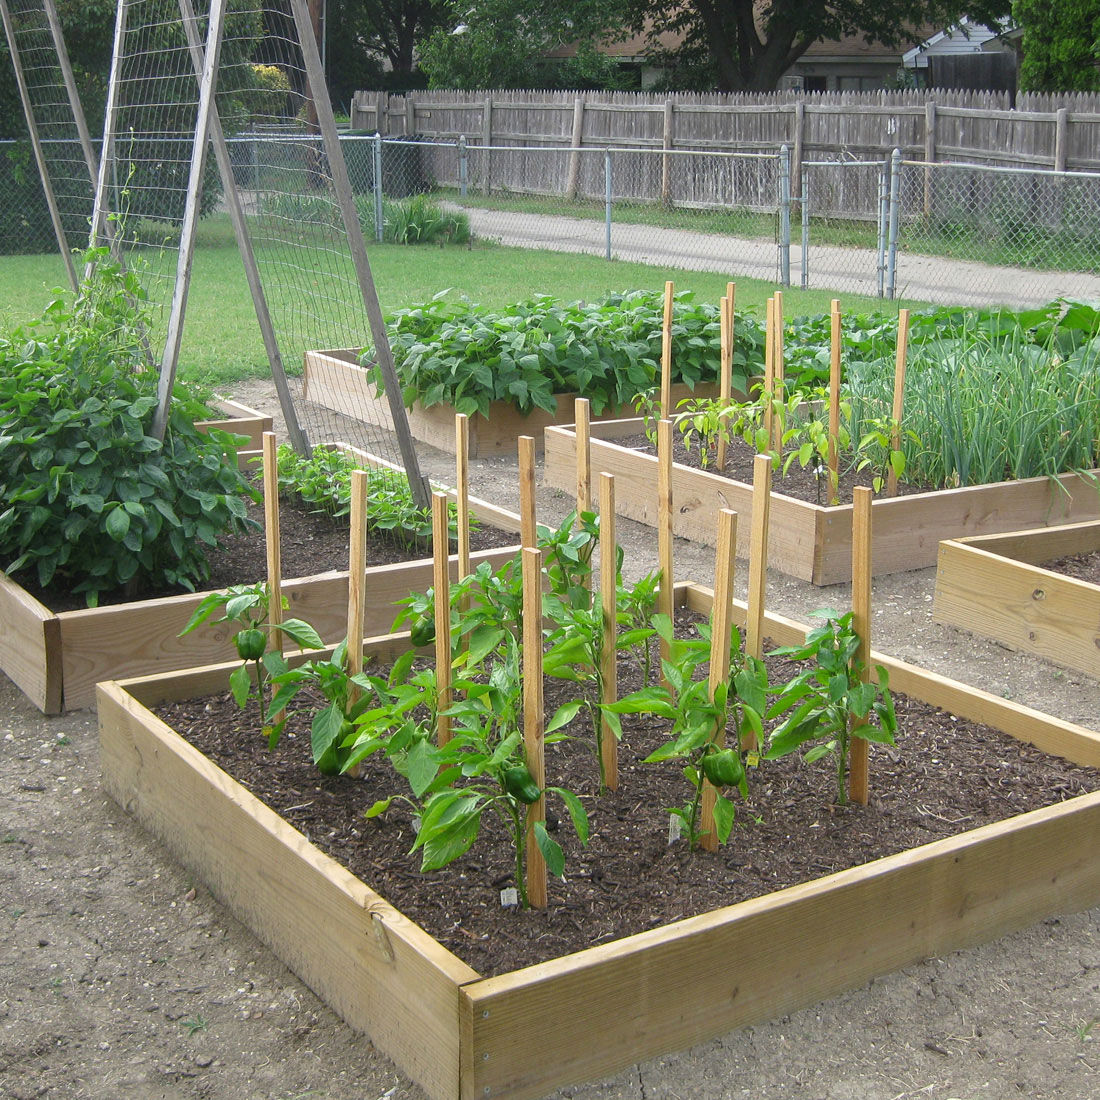 Shaped Seedbed Wood Square Shaped Seedbed Using Light Wood Feat Image Of Charming Vegetable Garden With Net Fence Idea Garden Simple Vegetable Garden Ideas For Your Living